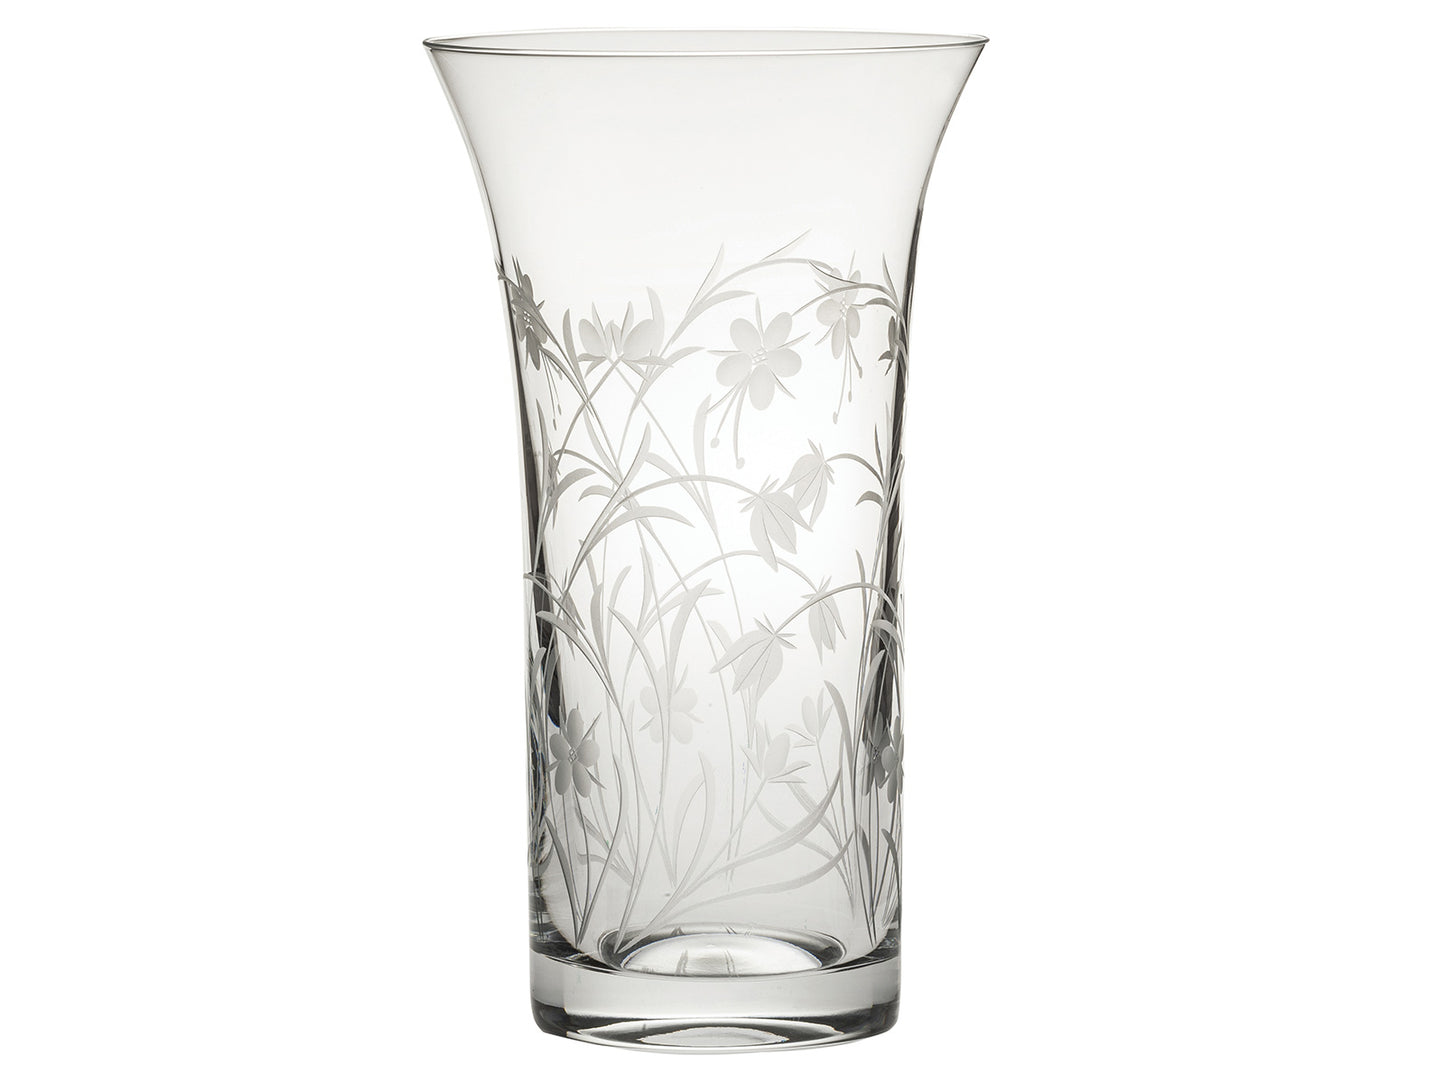 A large straight vase with a gently flared lip, engraved with a winding wildflower motif around the outside.